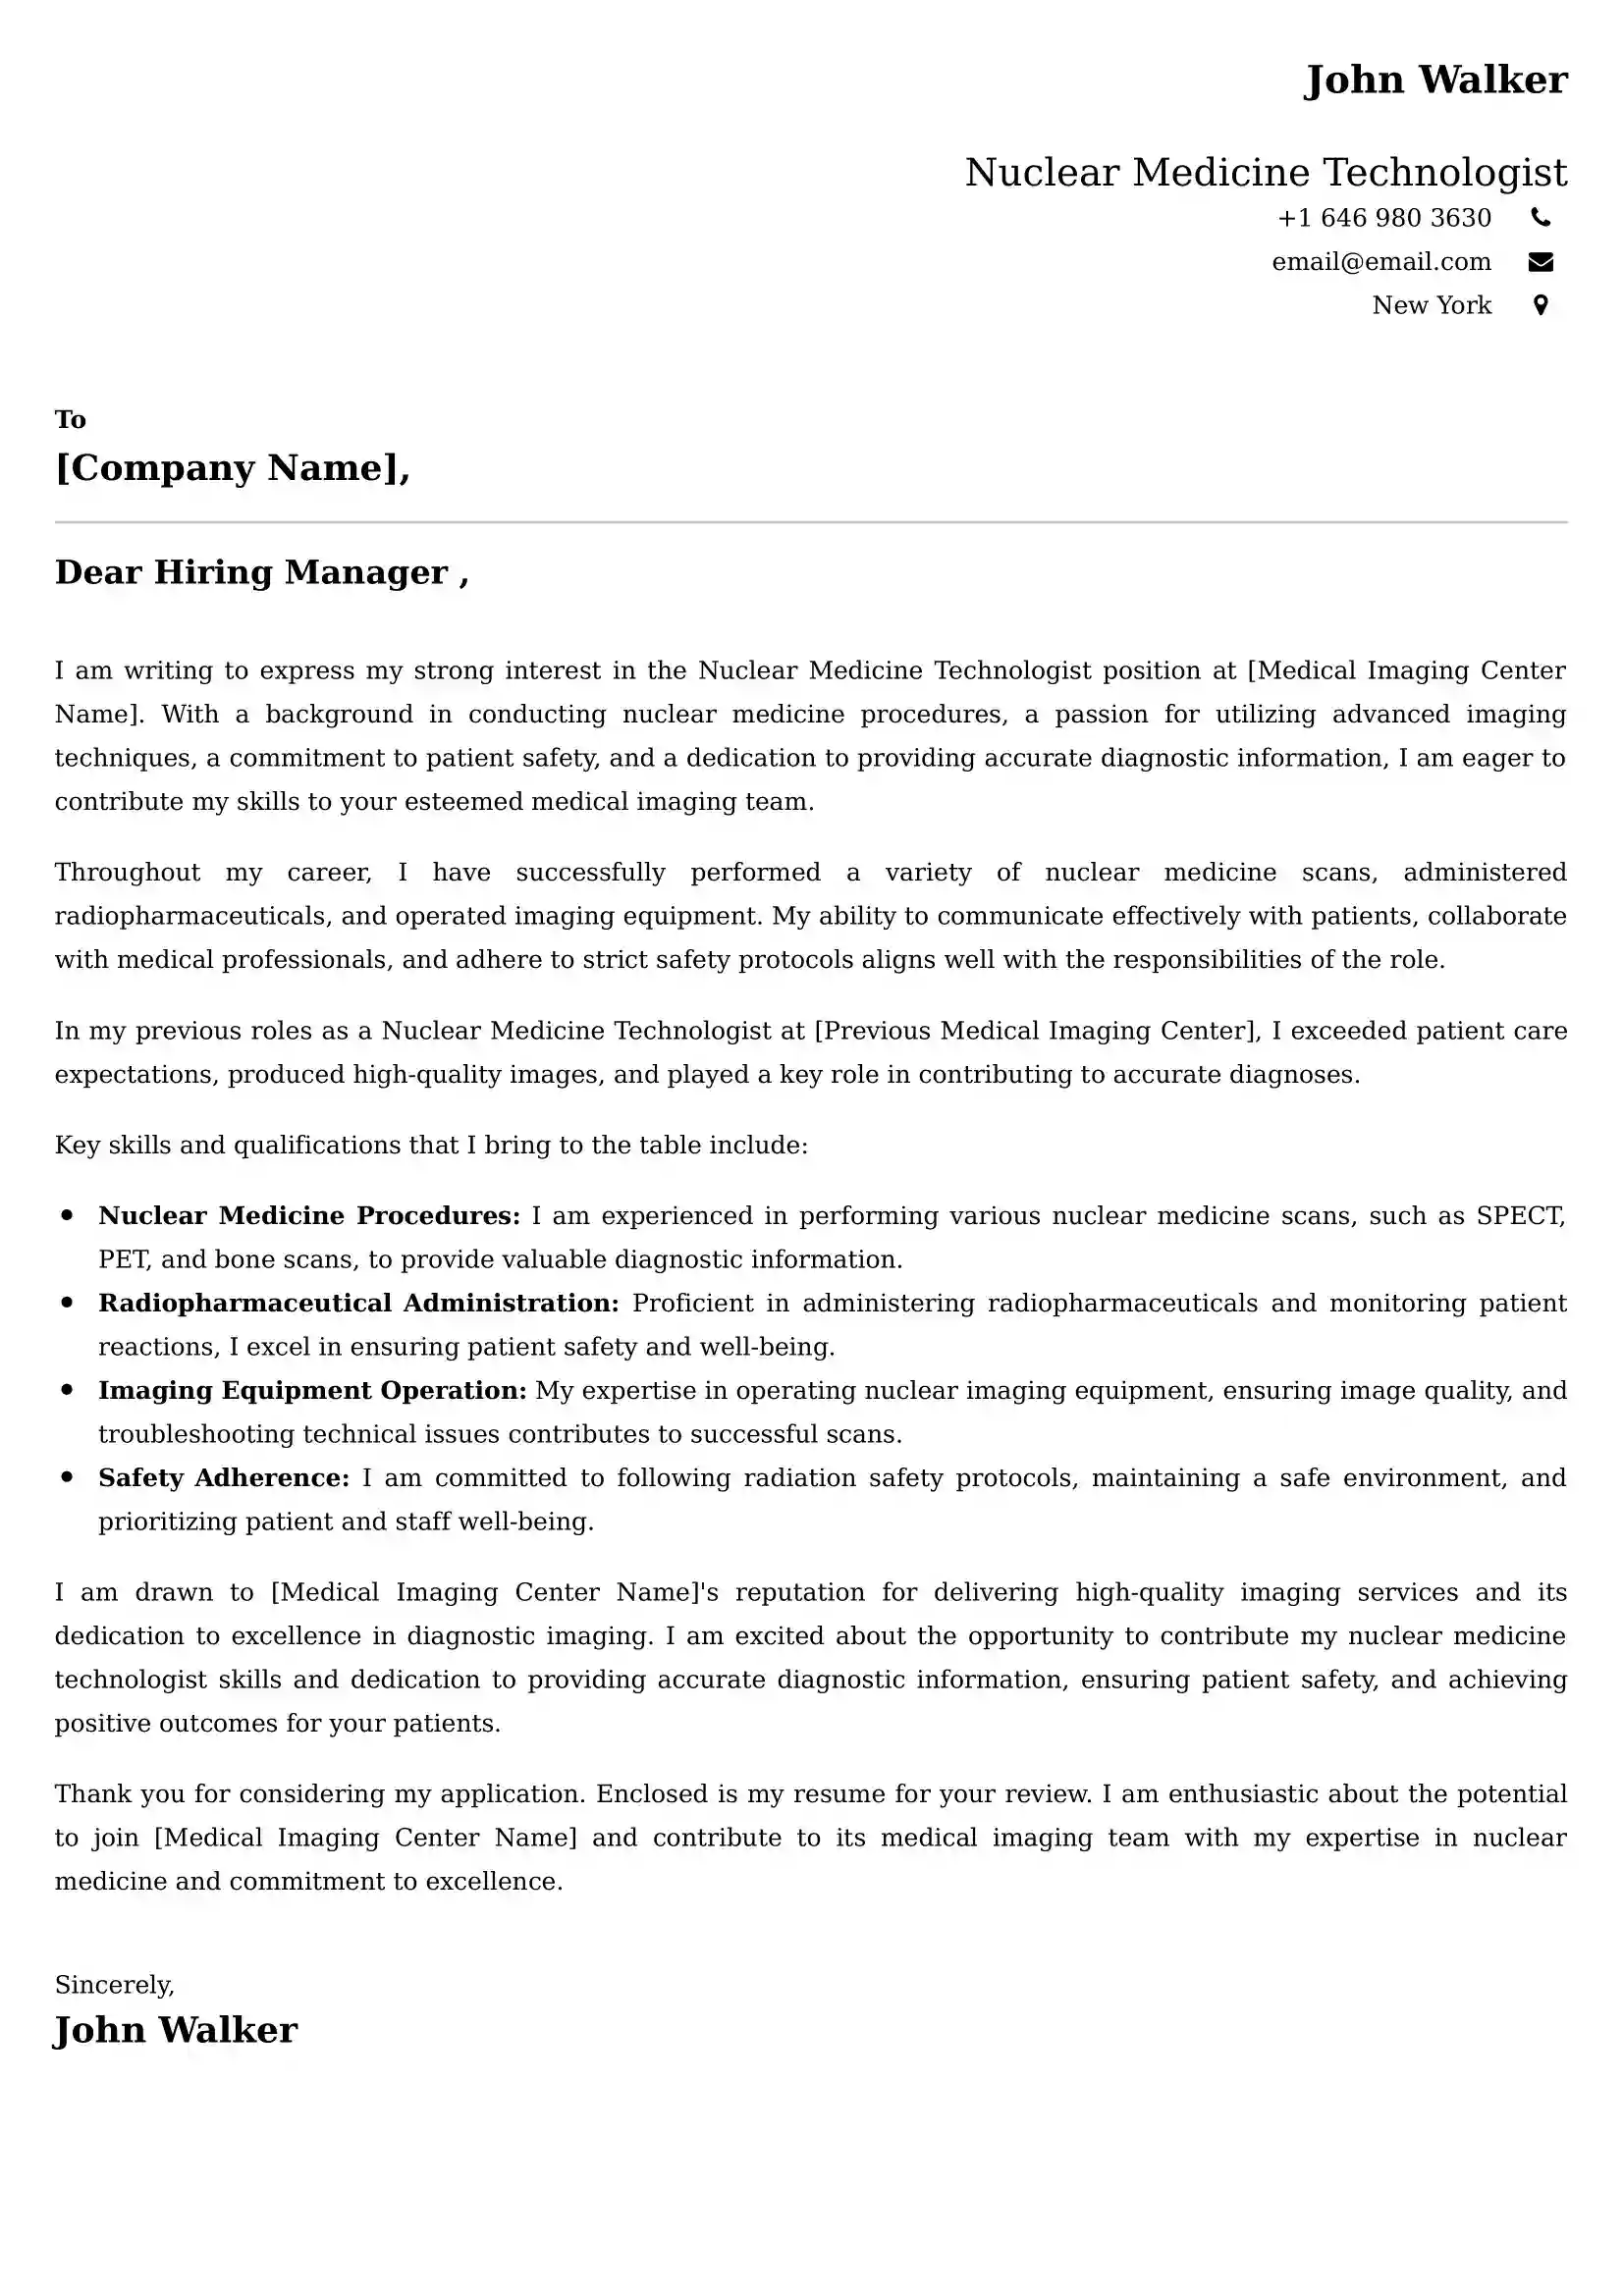 Nuclear Medicine Technologist Cover Letter Examples - Latest UK Format